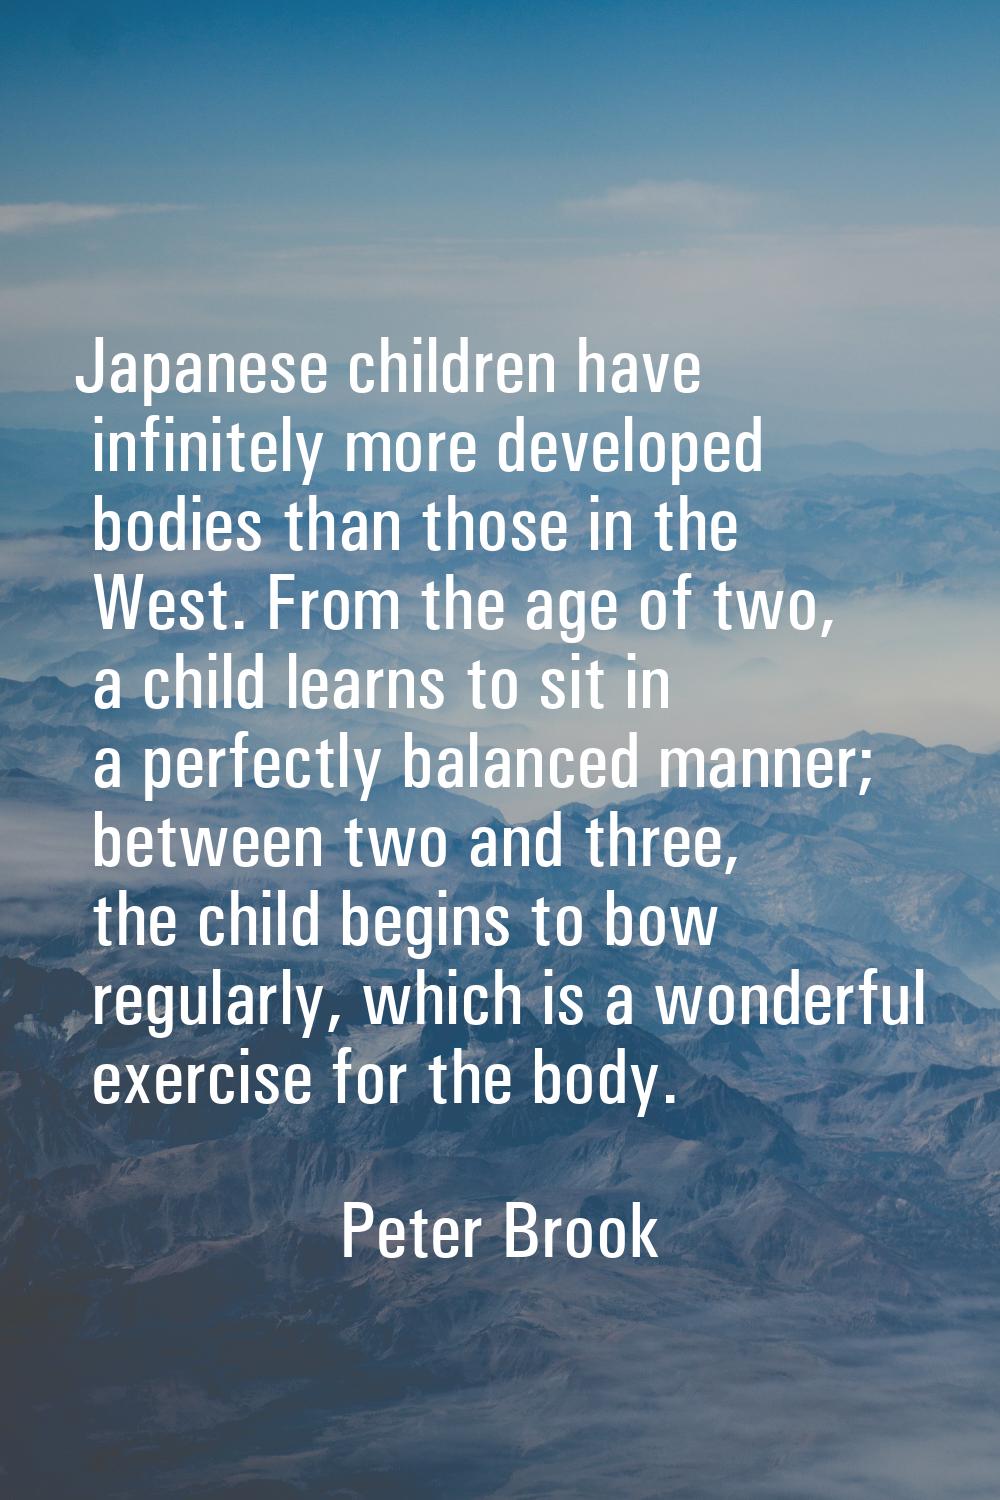 Japanese children have infinitely more developed bodies than those in the West. From the age of two